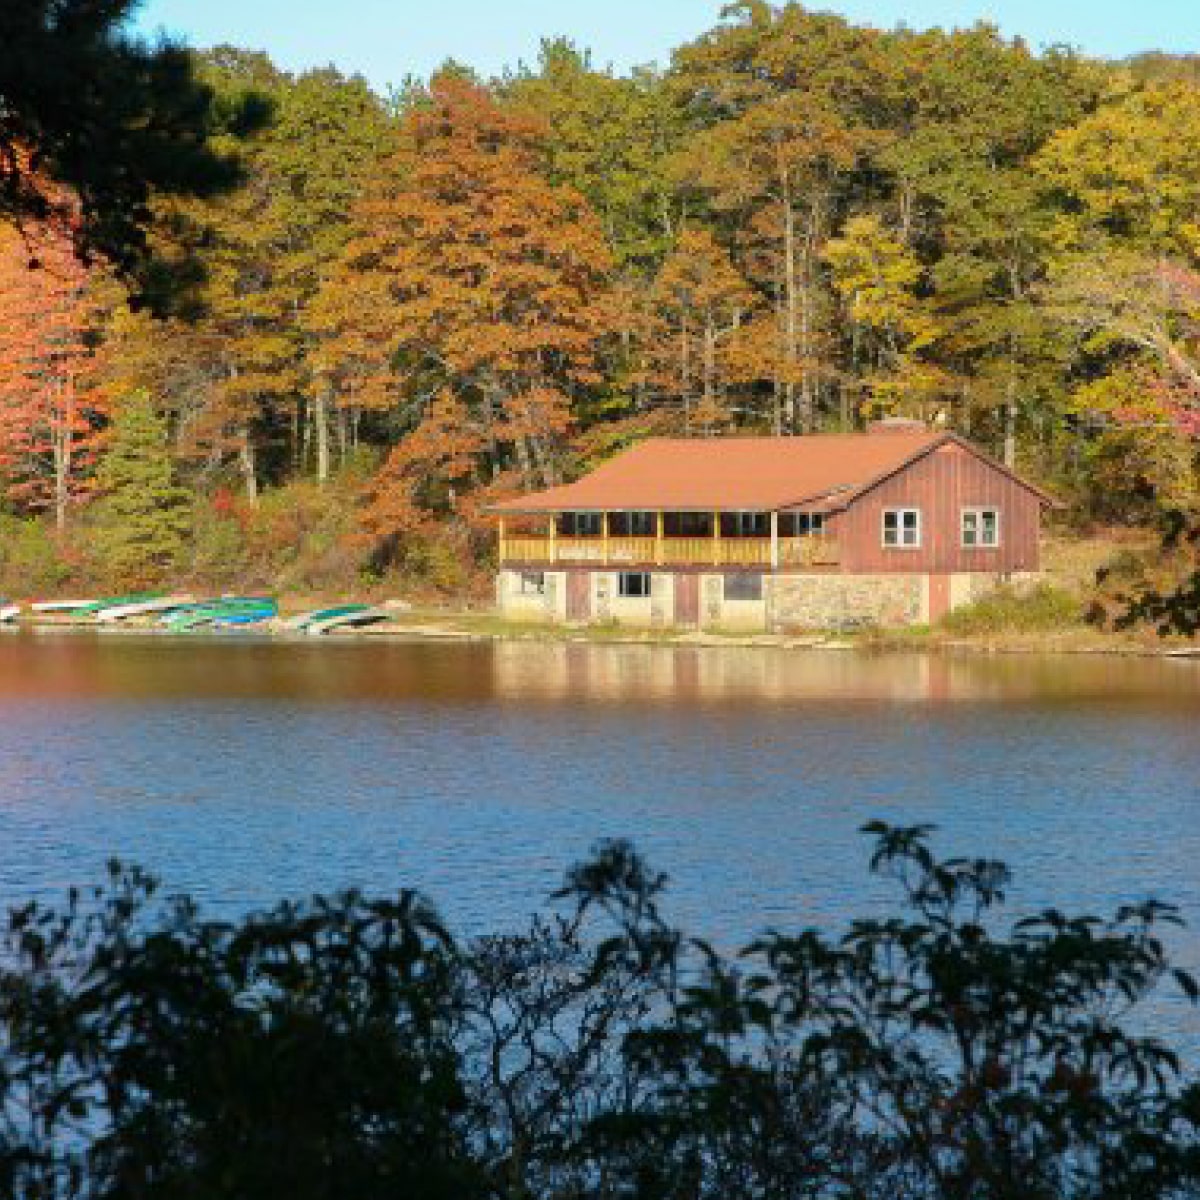 View of Mohican Outdoor Center across the lake